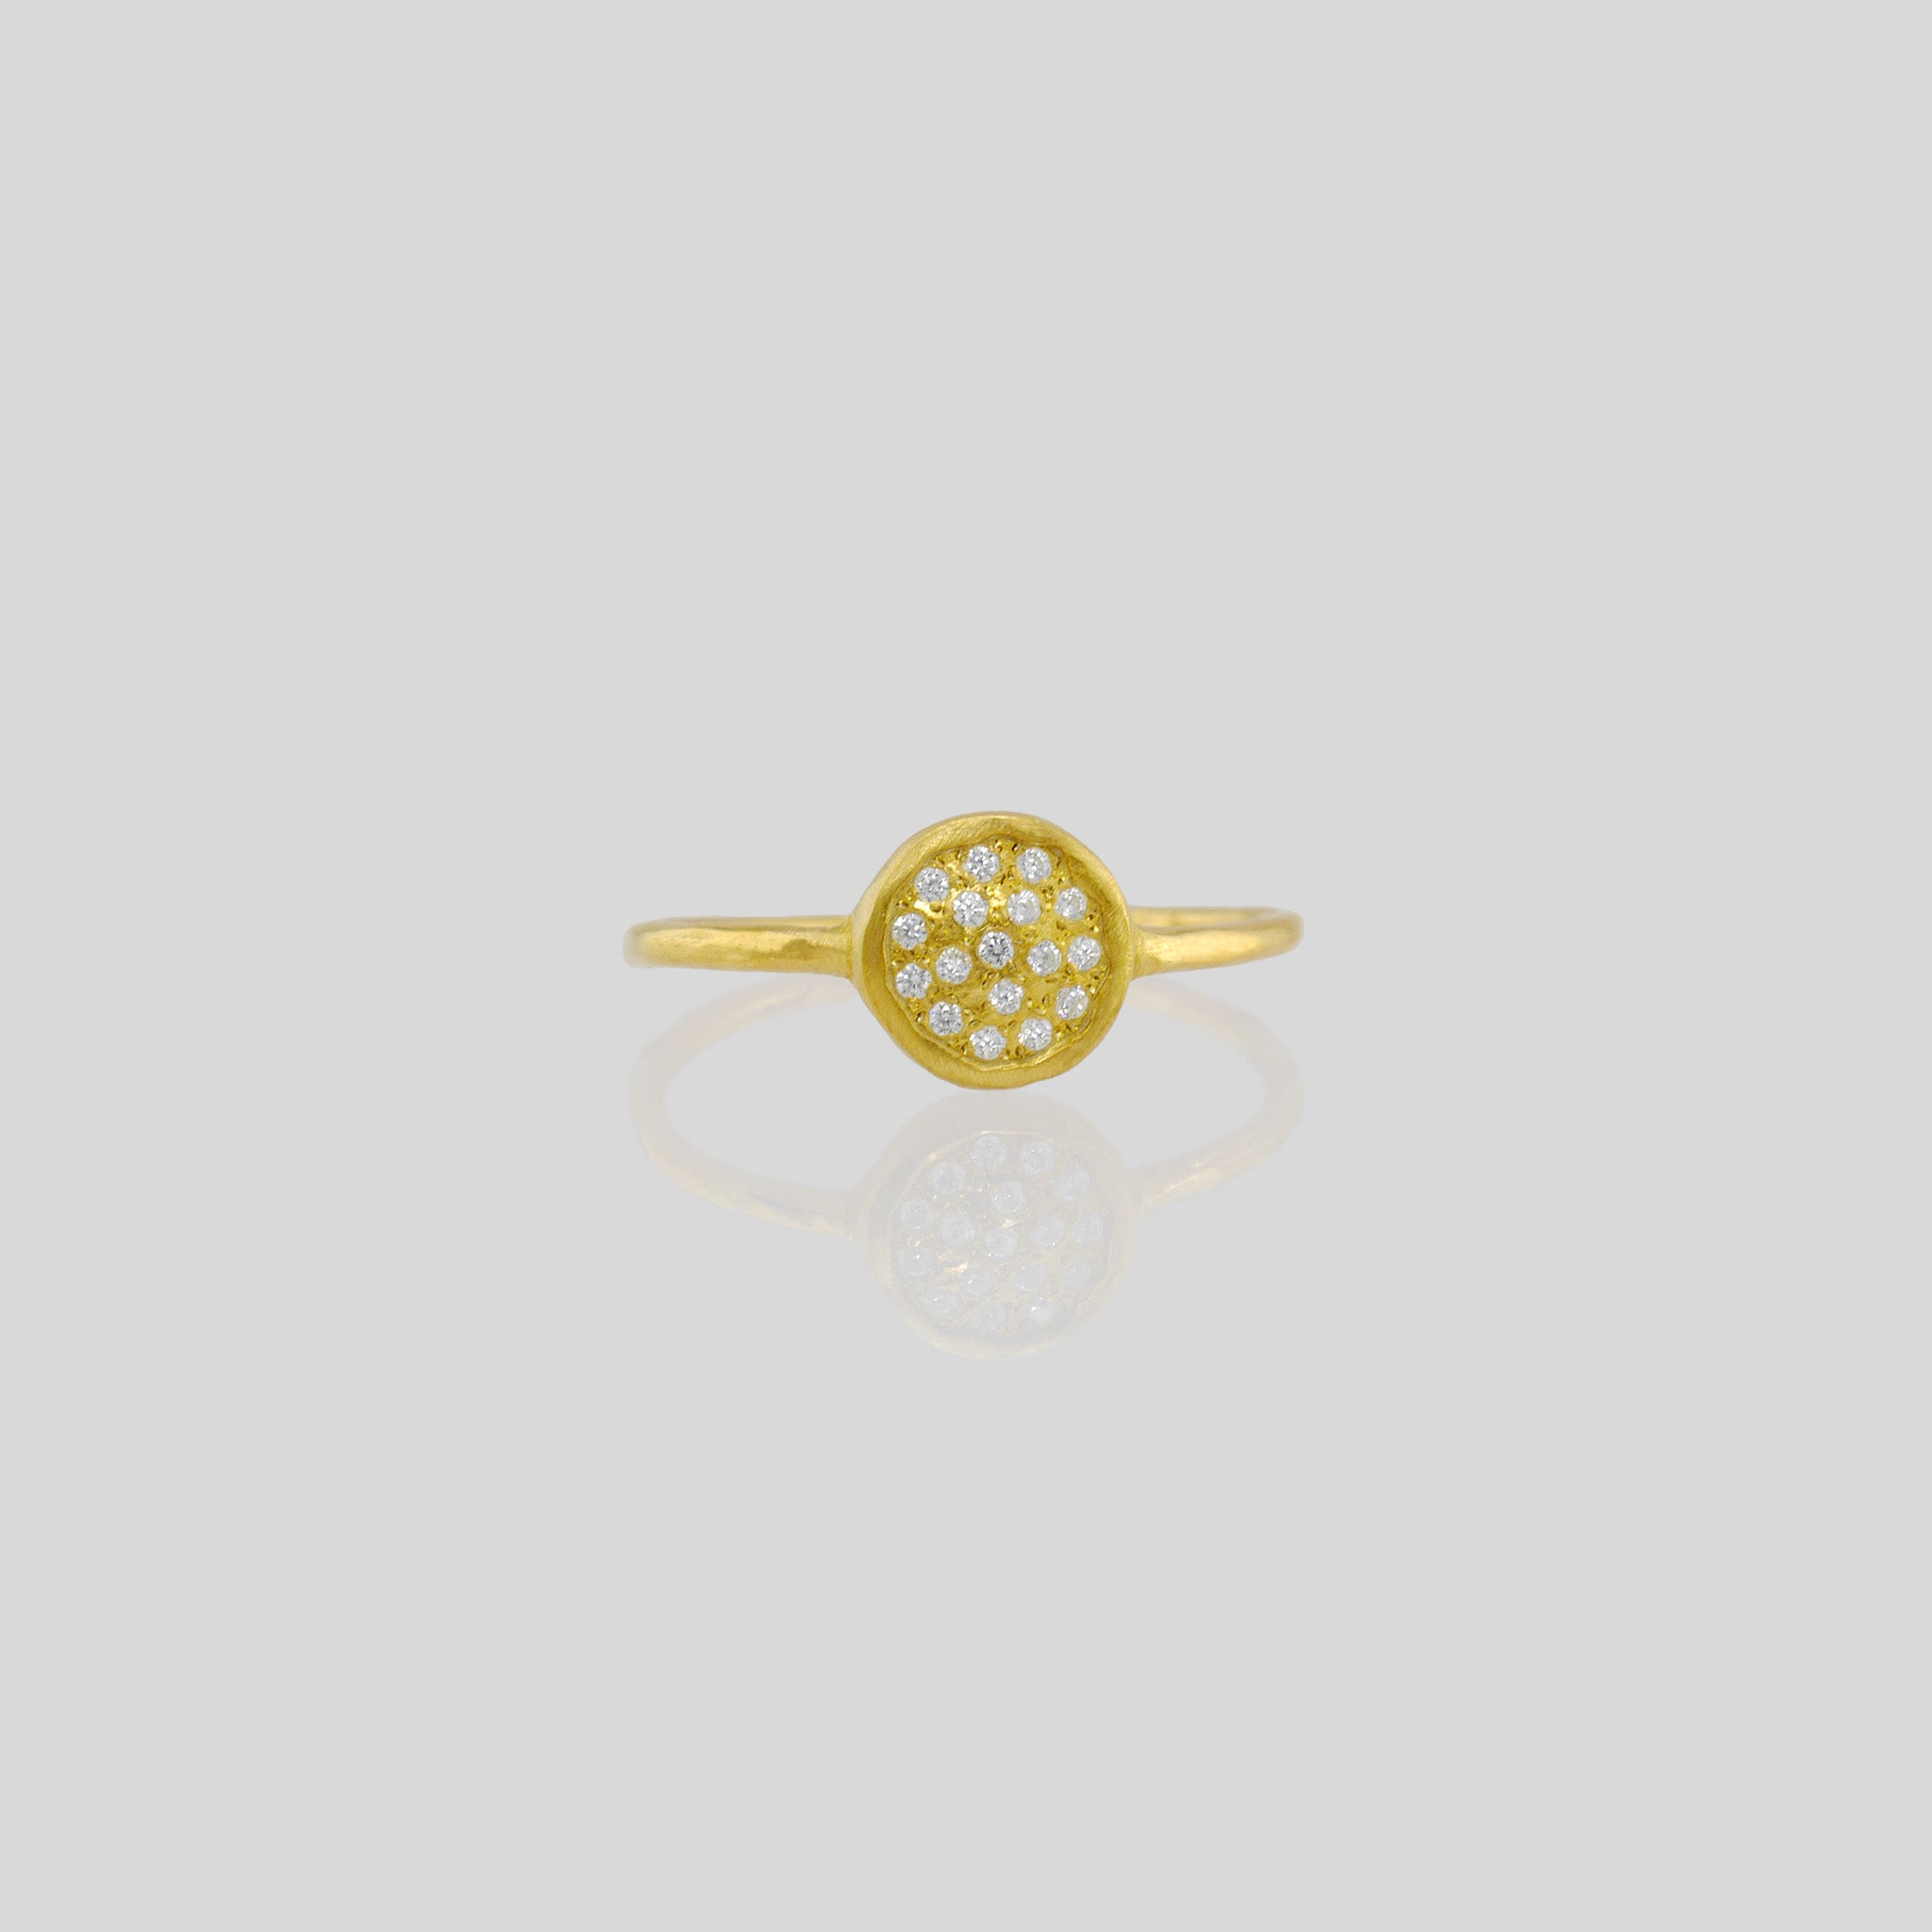 Front view of a Delicate hand-made 18k Gold ring with a circular plate set with tiny Diamonds. The sparkle from the stones resembles a starry night.